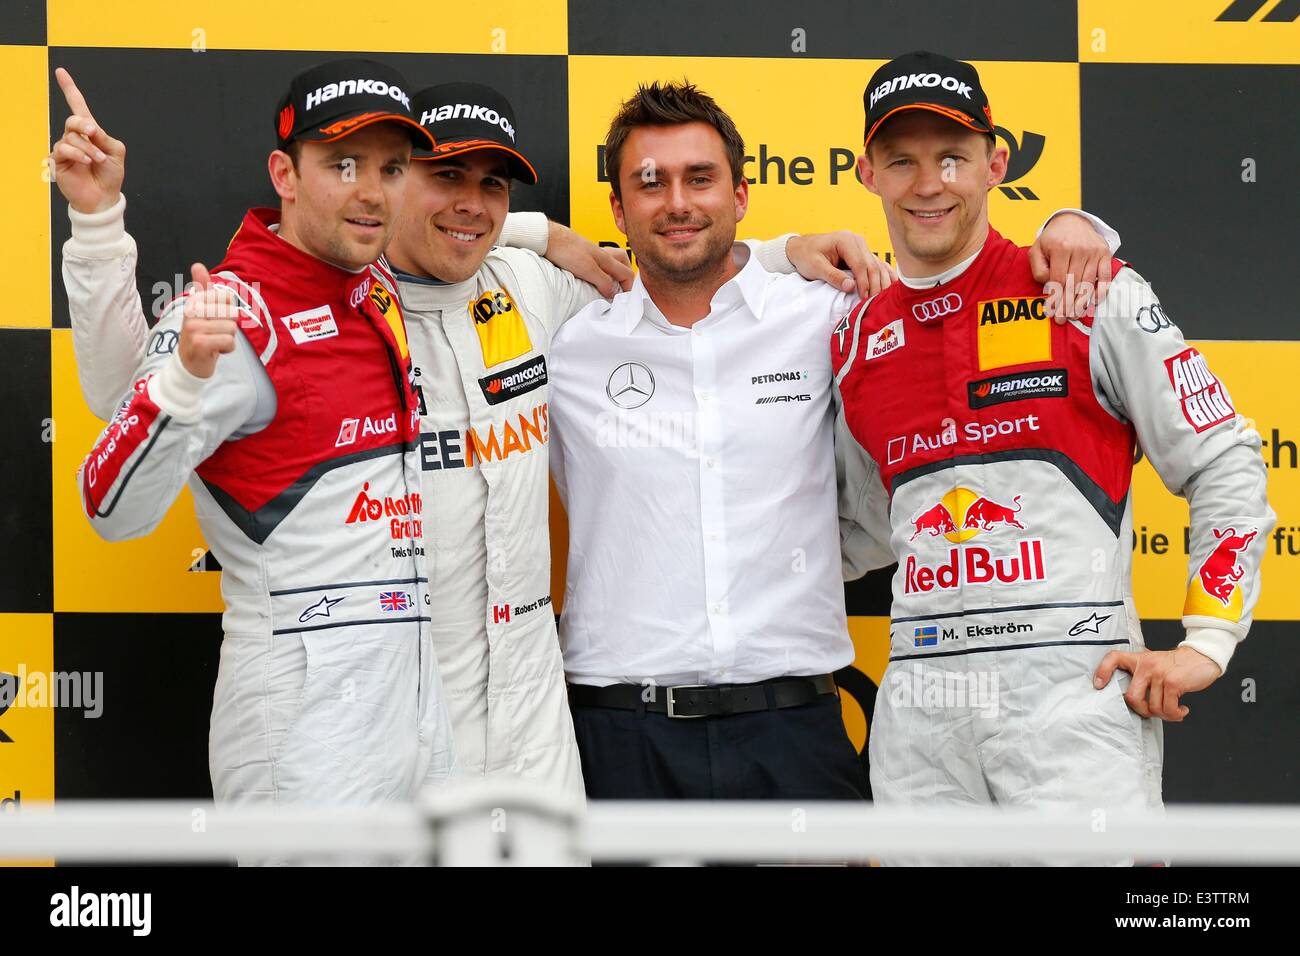 Nuremberg, Germany. 29th June, 2014. HANDOUT - A handout picture provided by Juergen Tap/ITR/dpa shows British pilot Jamie Green (Audi Sport Team Rosberg, L-R), Canadian pilot Robert Wickens (Free Man's World Mercedes AMG), Dennis Naegele (Wickens 'car chief) and Swedish pilot Mattias Ekstroem (Audi Sport Team Abt) after the DTM, German Touring Car Masters race at Norisring in Nuremberg, Germany, 29 June 2014. Wickens won against Green and Eckstroem. Credit:  dpa/Alamy Live News Stock Photo